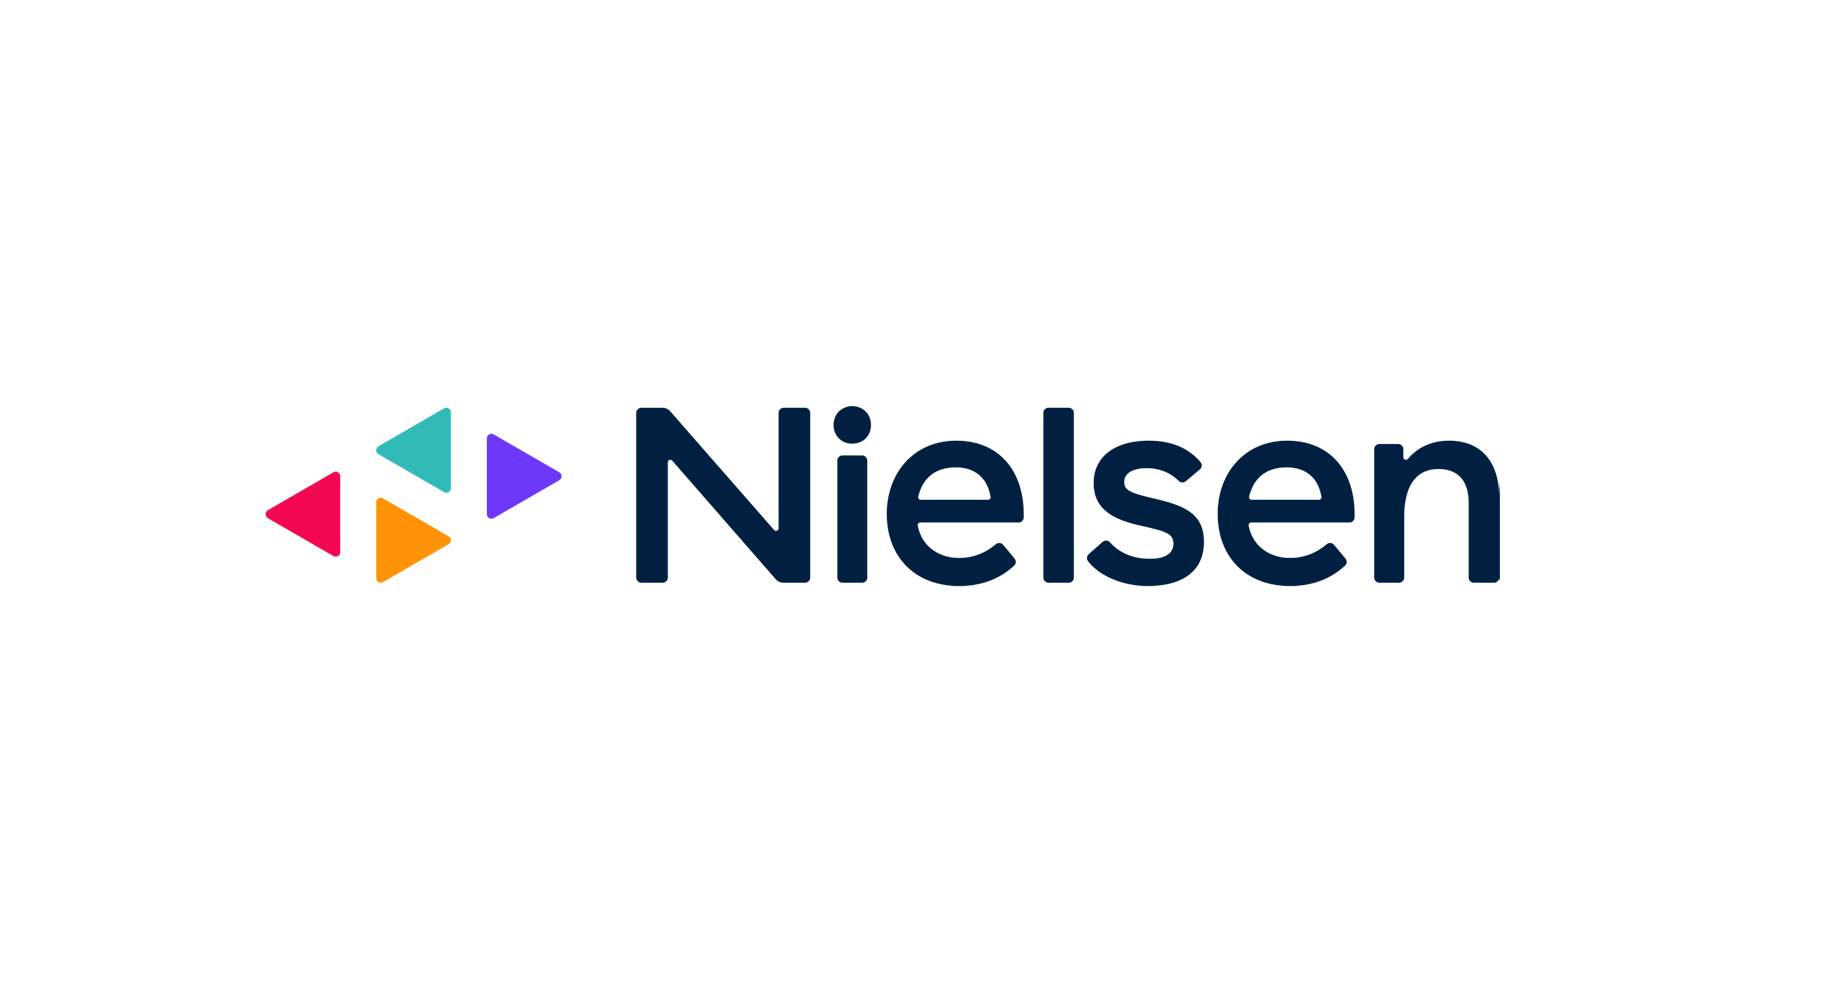 Nielsen's new brand identity and logo: an orange, a purple, a red and a teal triangle next to text that says "Nielsen